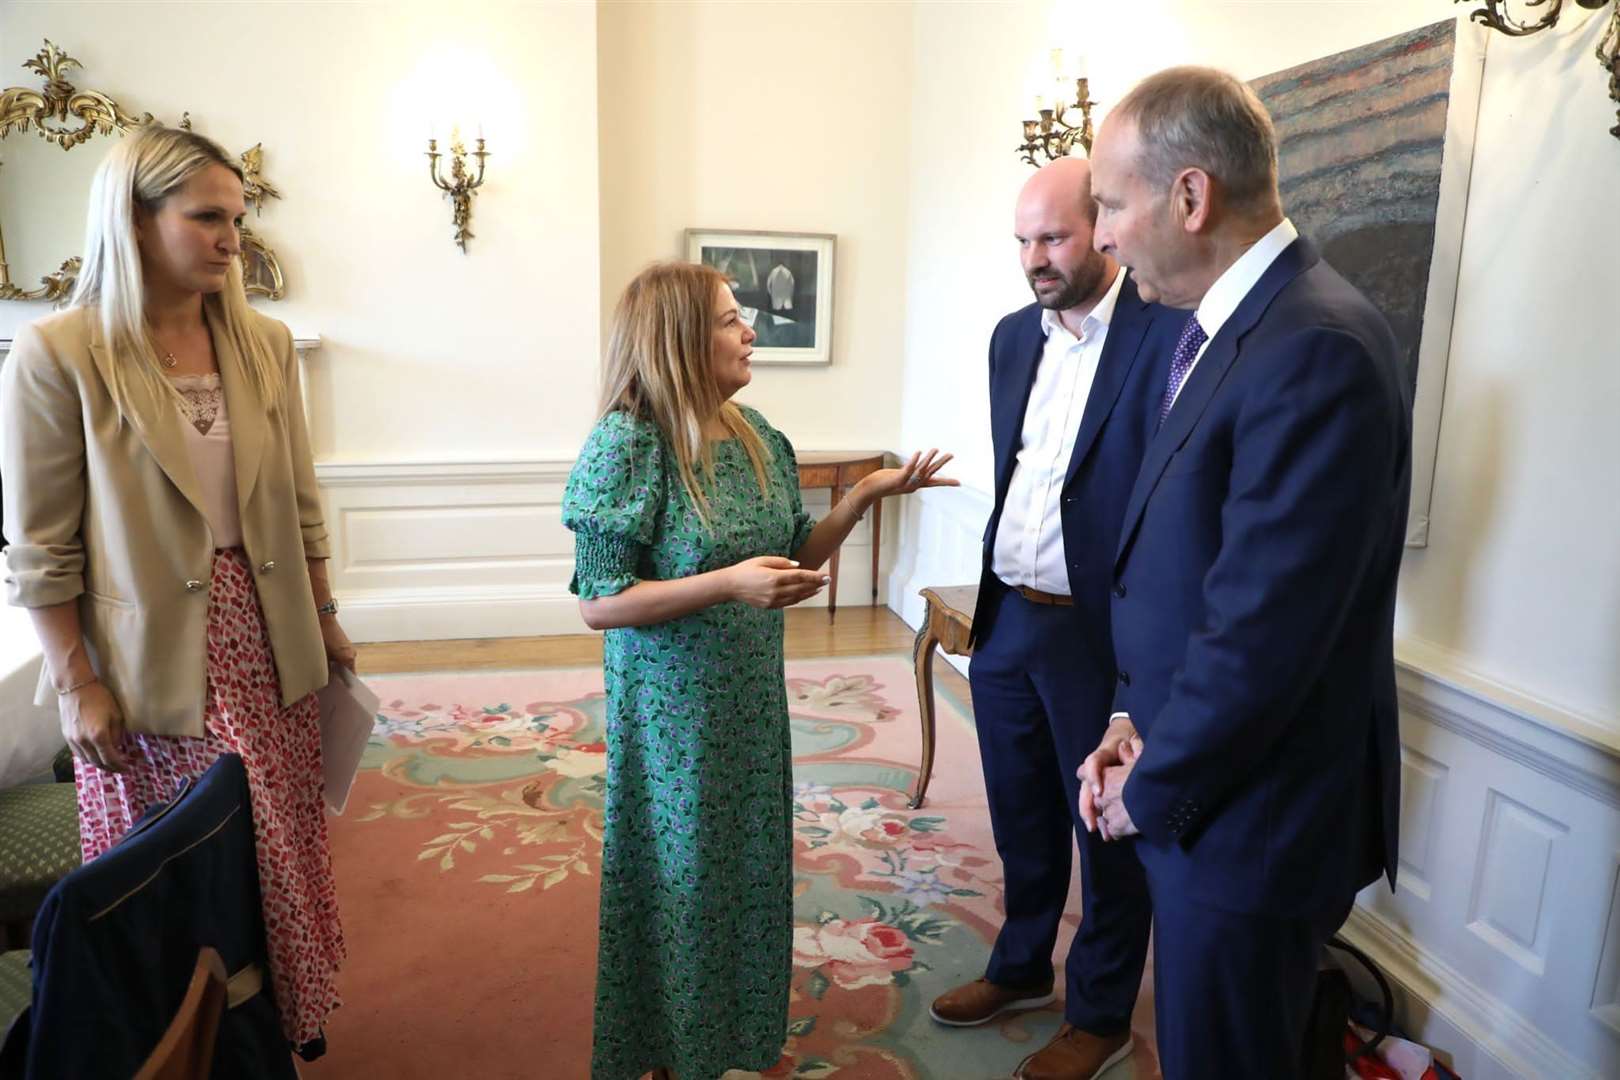 Cat Gallagher-Wilkinson, centre, met with Tanaiste Micheal Martin, right, and justice minister Helen McEntee, left, at Iveagh House in Dublin (Department of Foreign Affairs/PA)